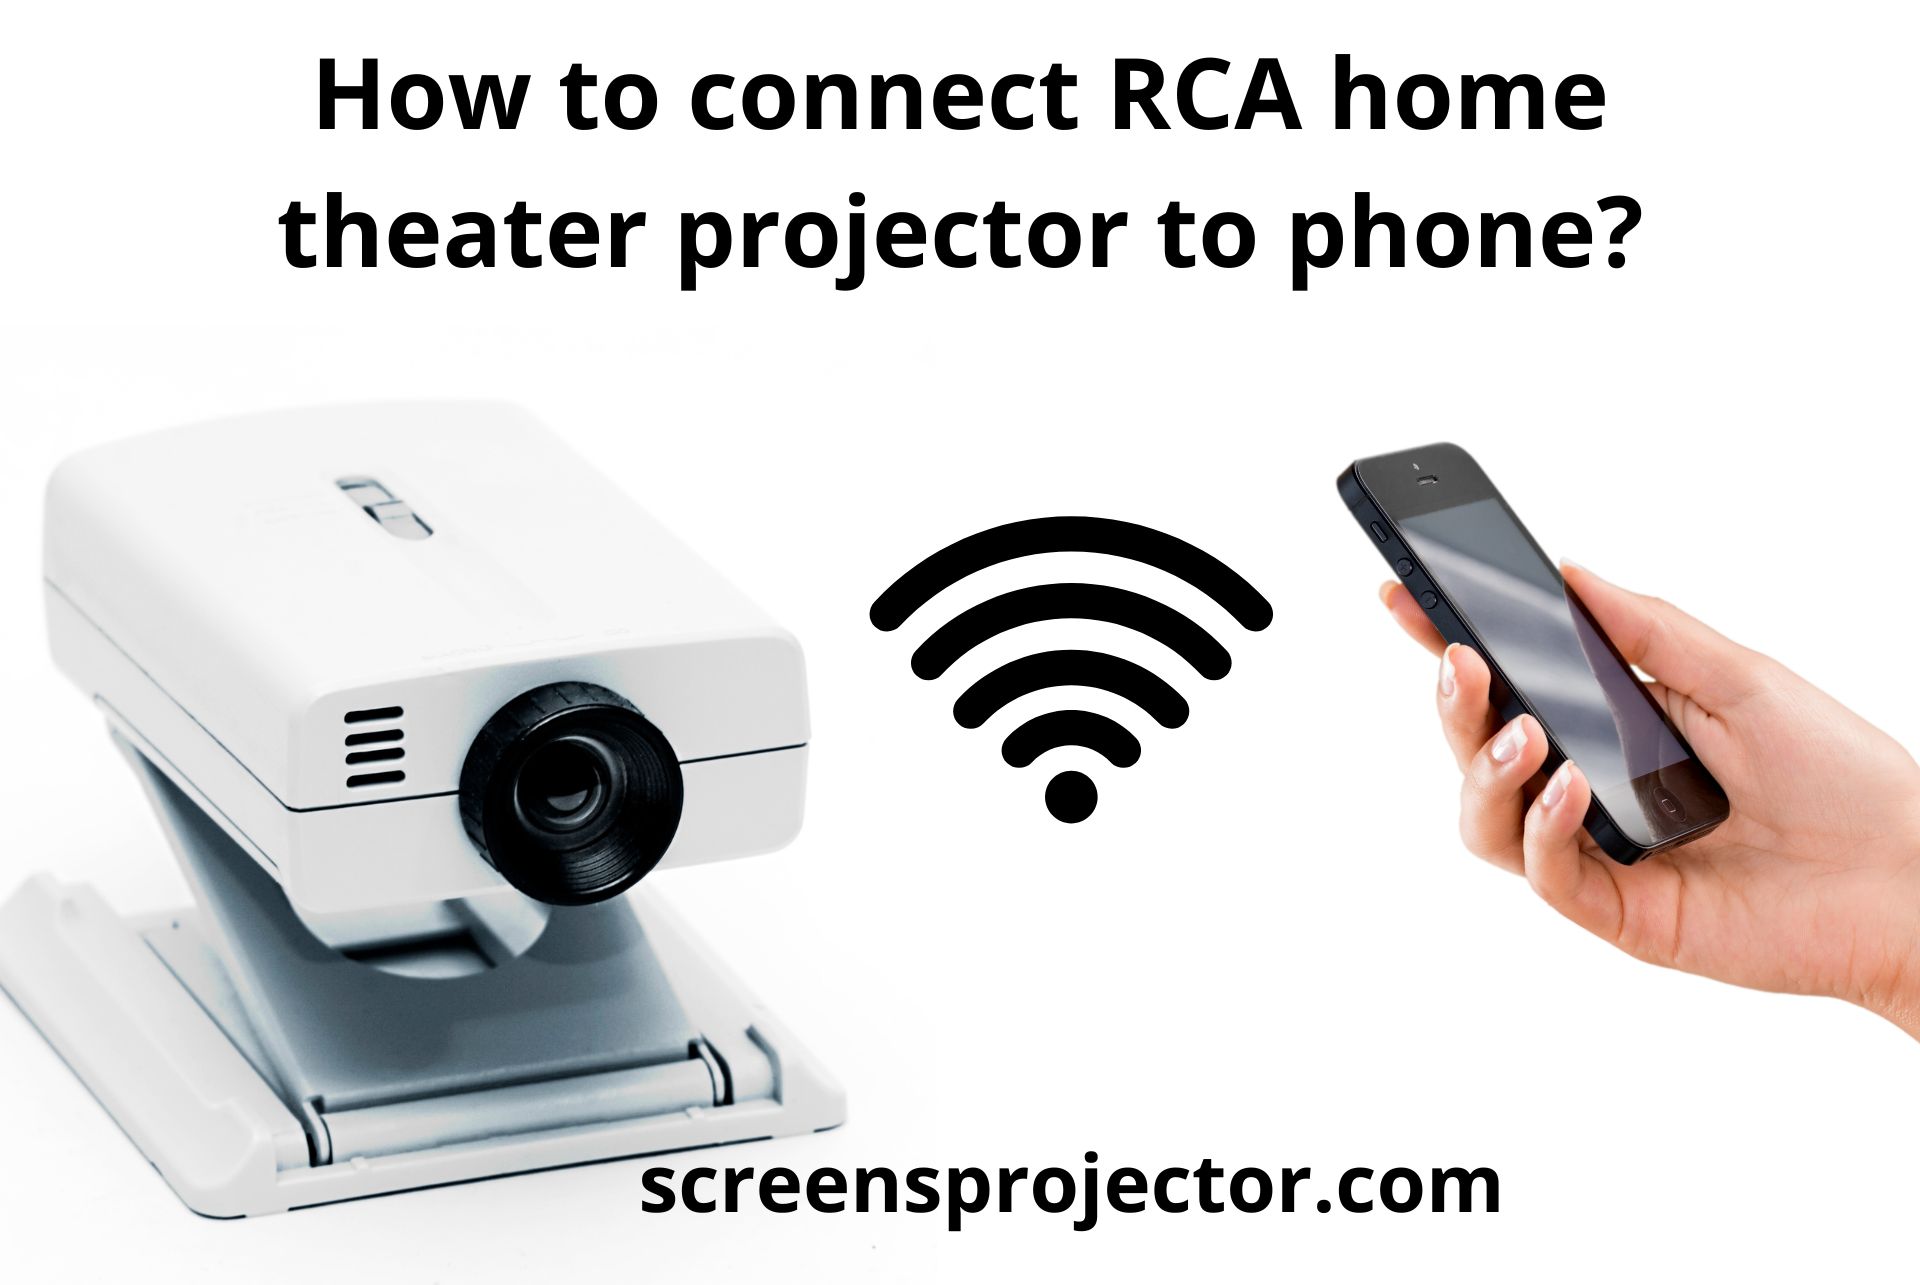 How to connect RCA home theater projector to phone: 4 ways